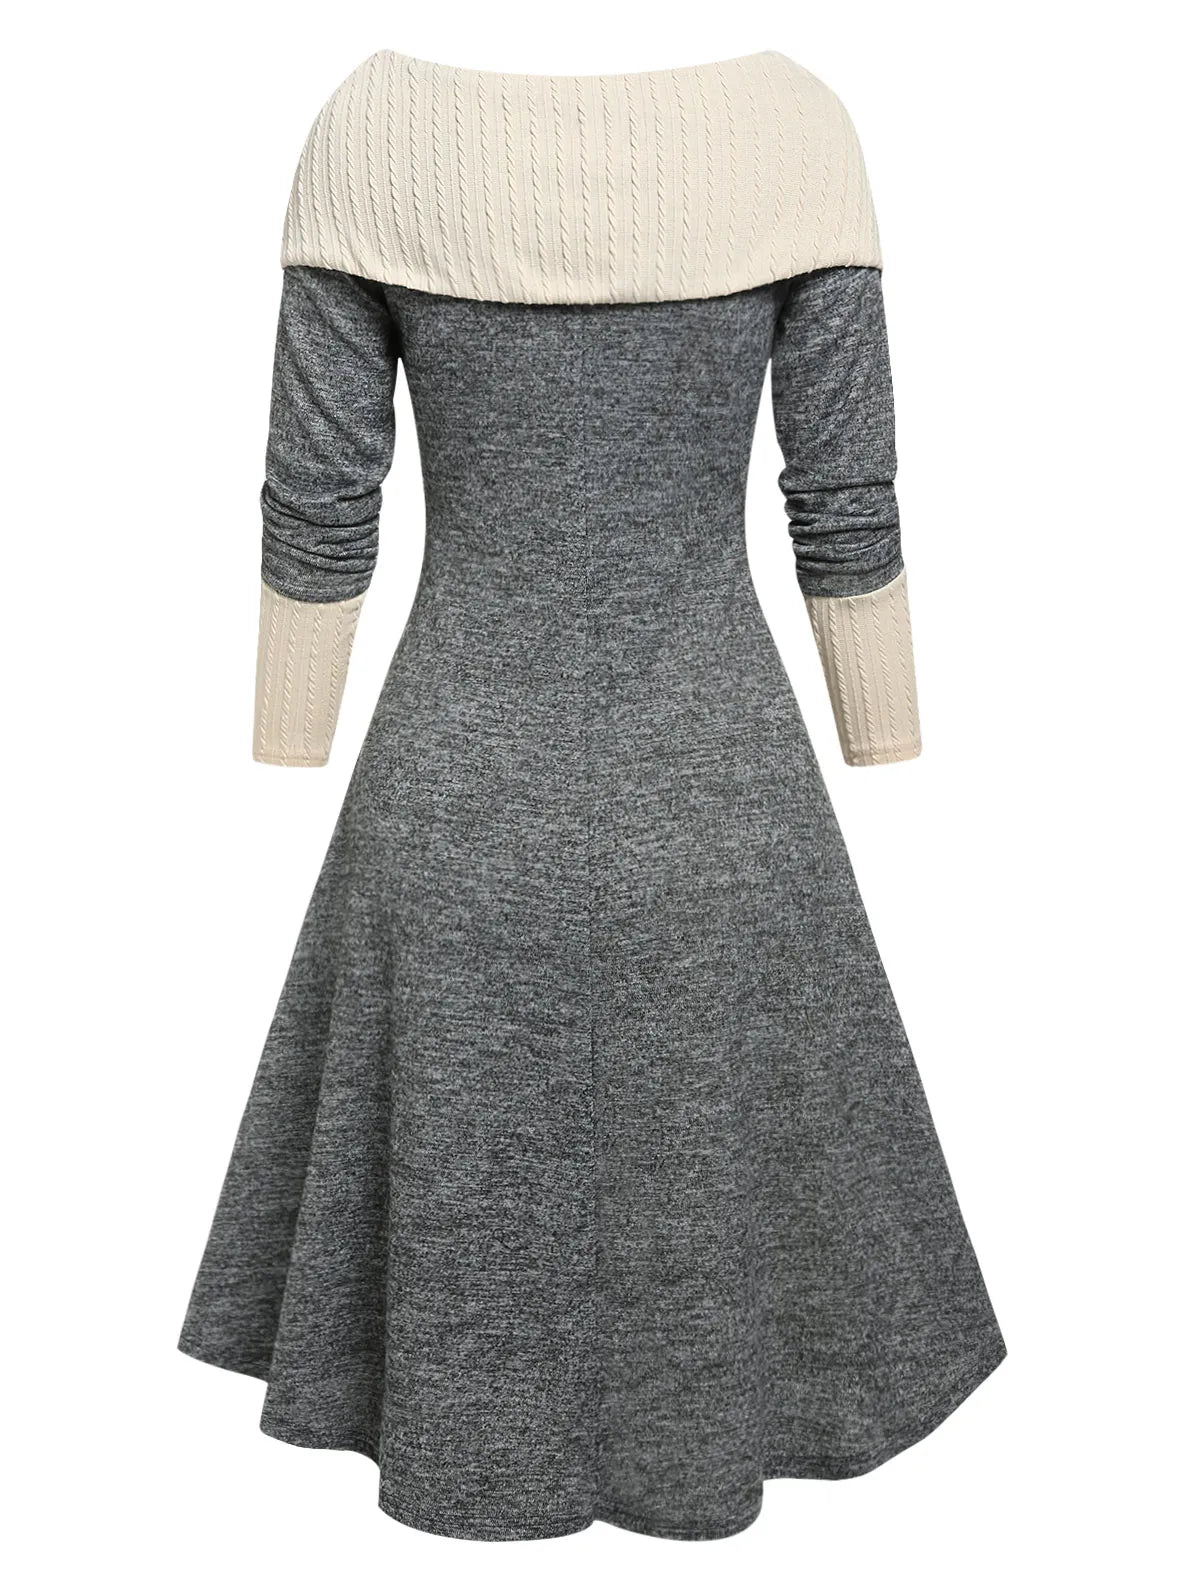 Long Sleeve Lace Up Knitted Dress